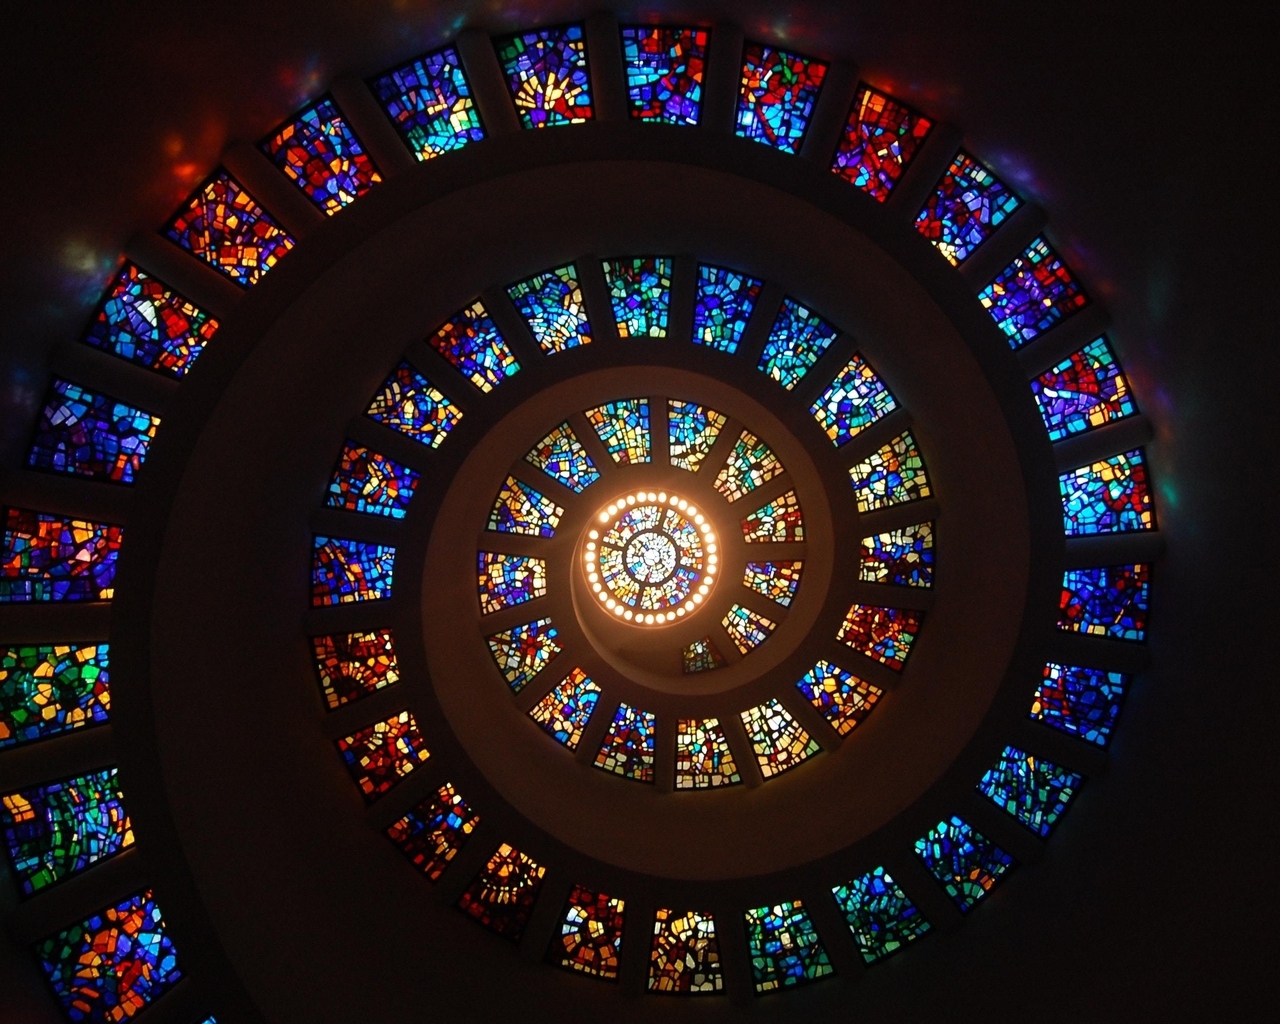 Image: Stained glass, colorful, dark background, curl, spiral